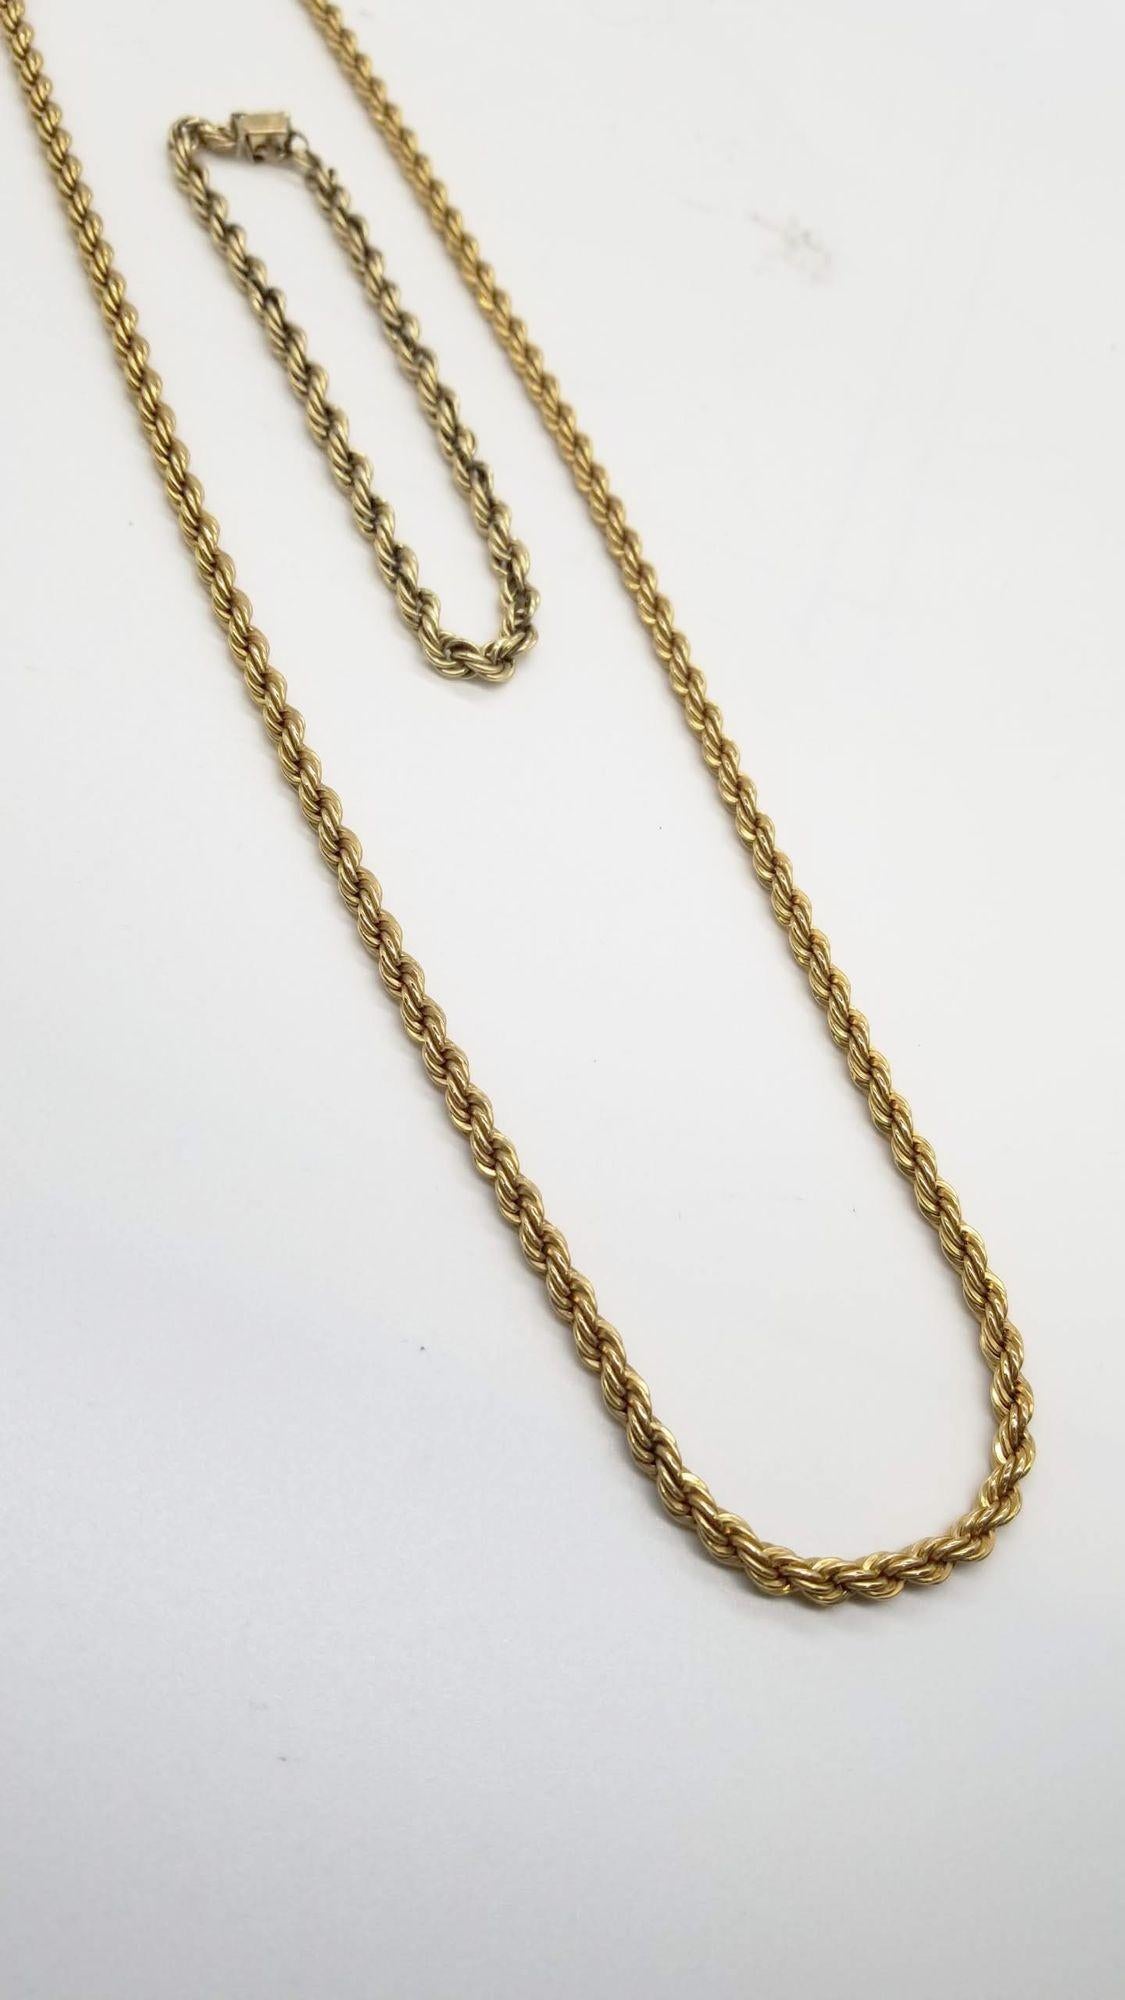 This vintage 14k Gold Rope Chain Necklace and Bracelet set exudes refined beauty and sophistication. The necklace, measuring a graceful 30 inches in length and boasting a width of 2.30mm, showcases the richness of 14k gold in its lustrous finish. It